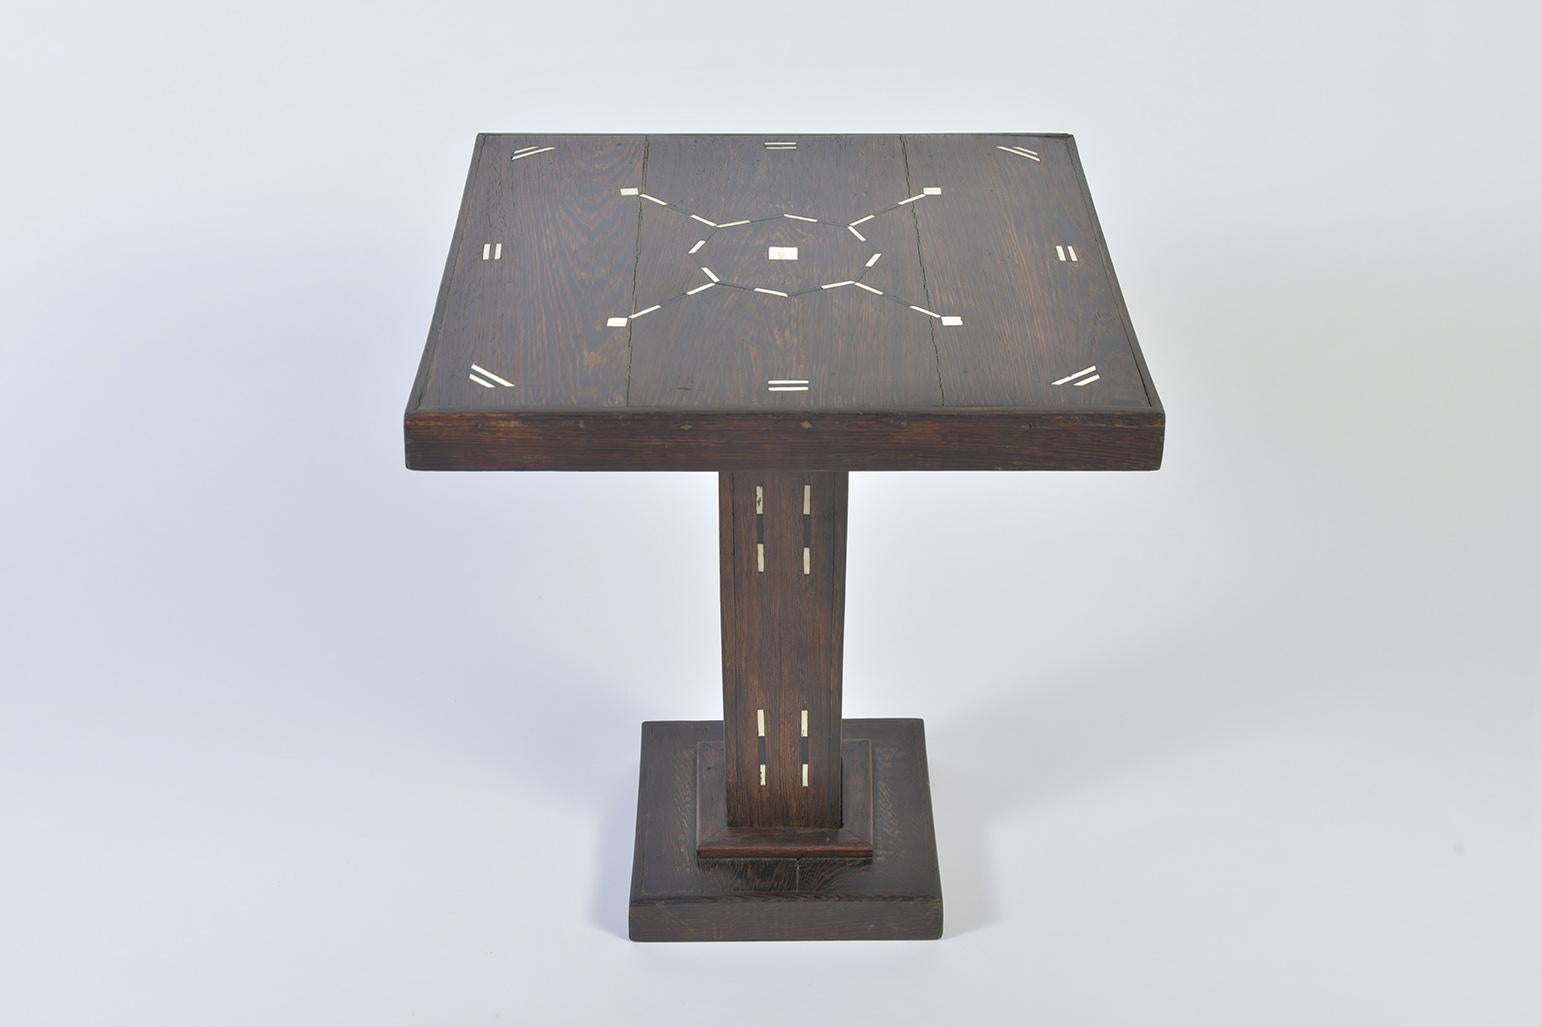 French Art Deco Side Table